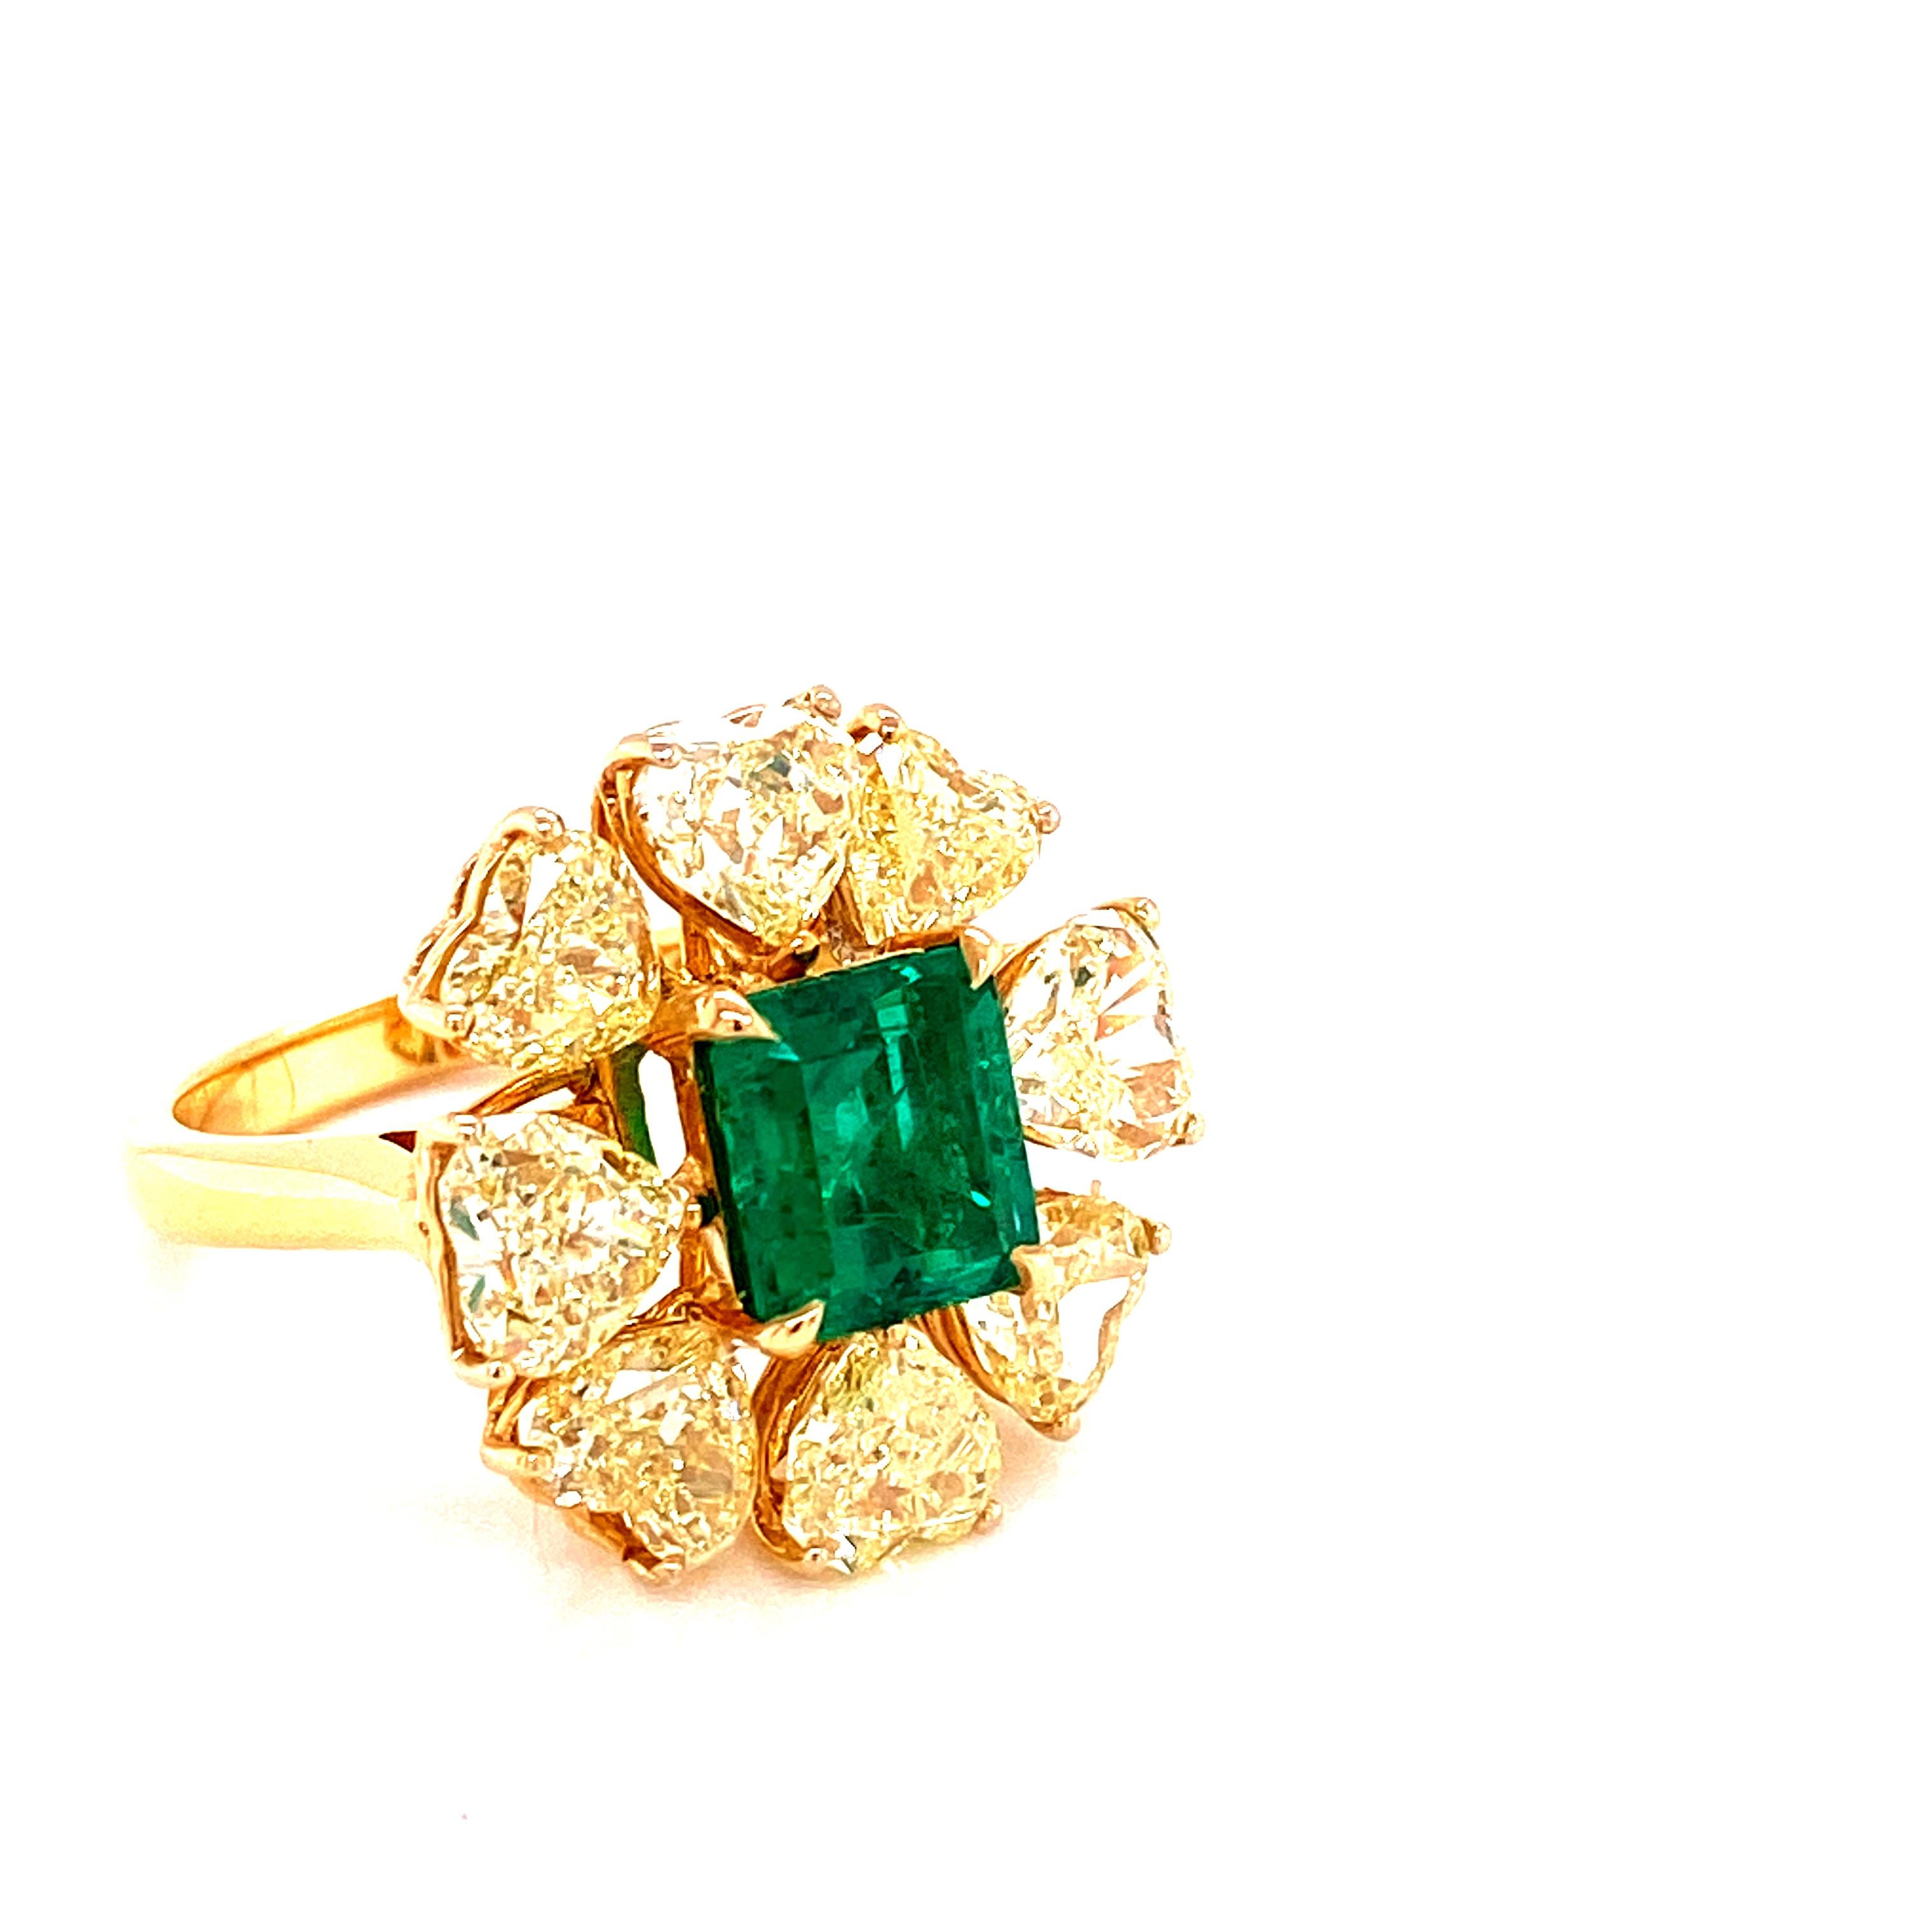 Octagon Cut 2.08 Carat GRS Certified Vivid Green Colombian Emerald and Yellow Diamond Ring